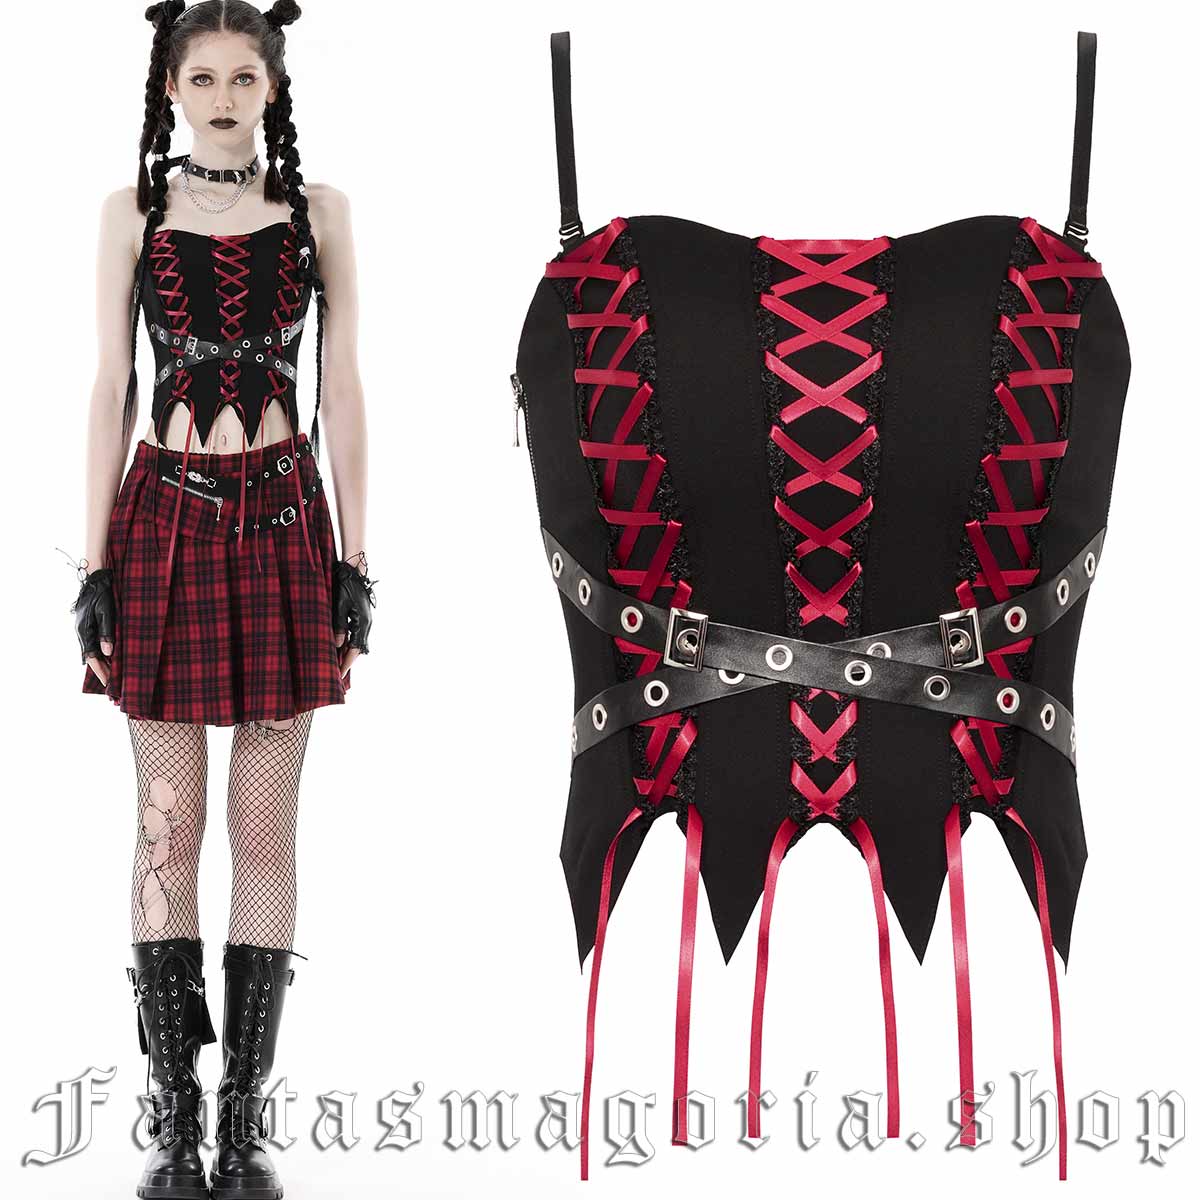 Women's Punk black sleeveless corset style red lace-up detailing top. - Dark in Love - CW049